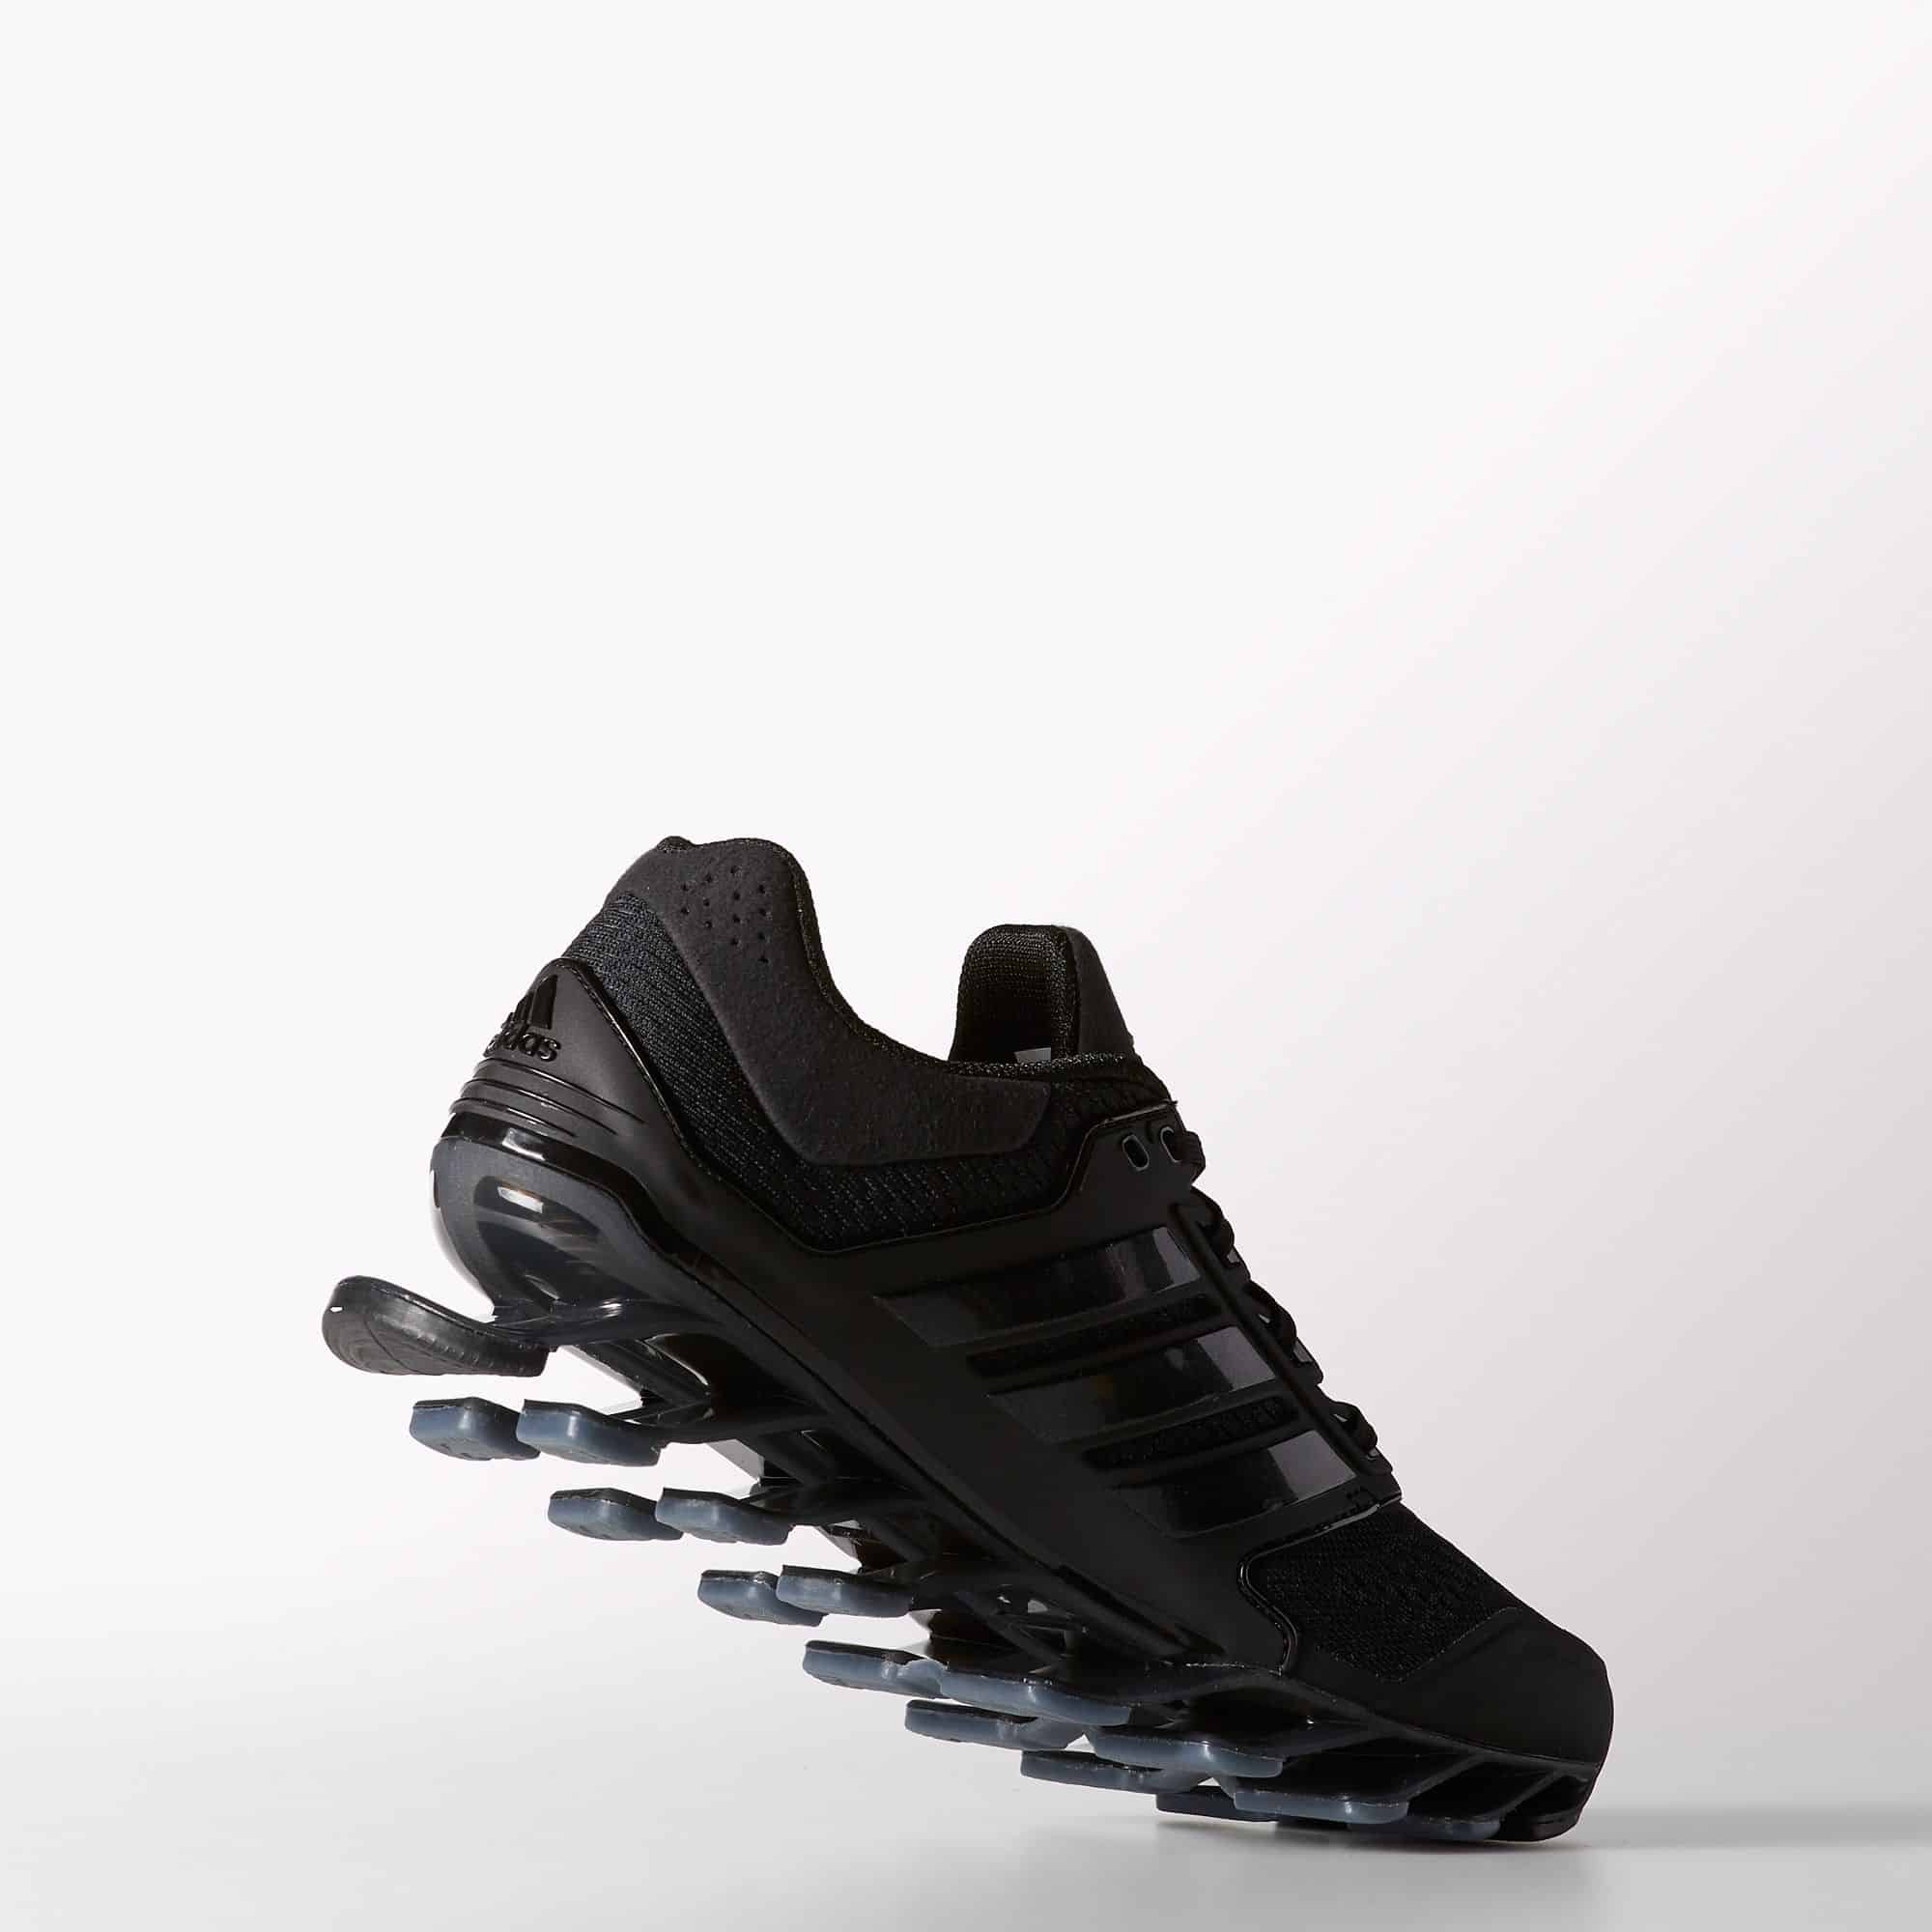 Adidas Springblade Running Shoes Cool Gift Idea for Athletes